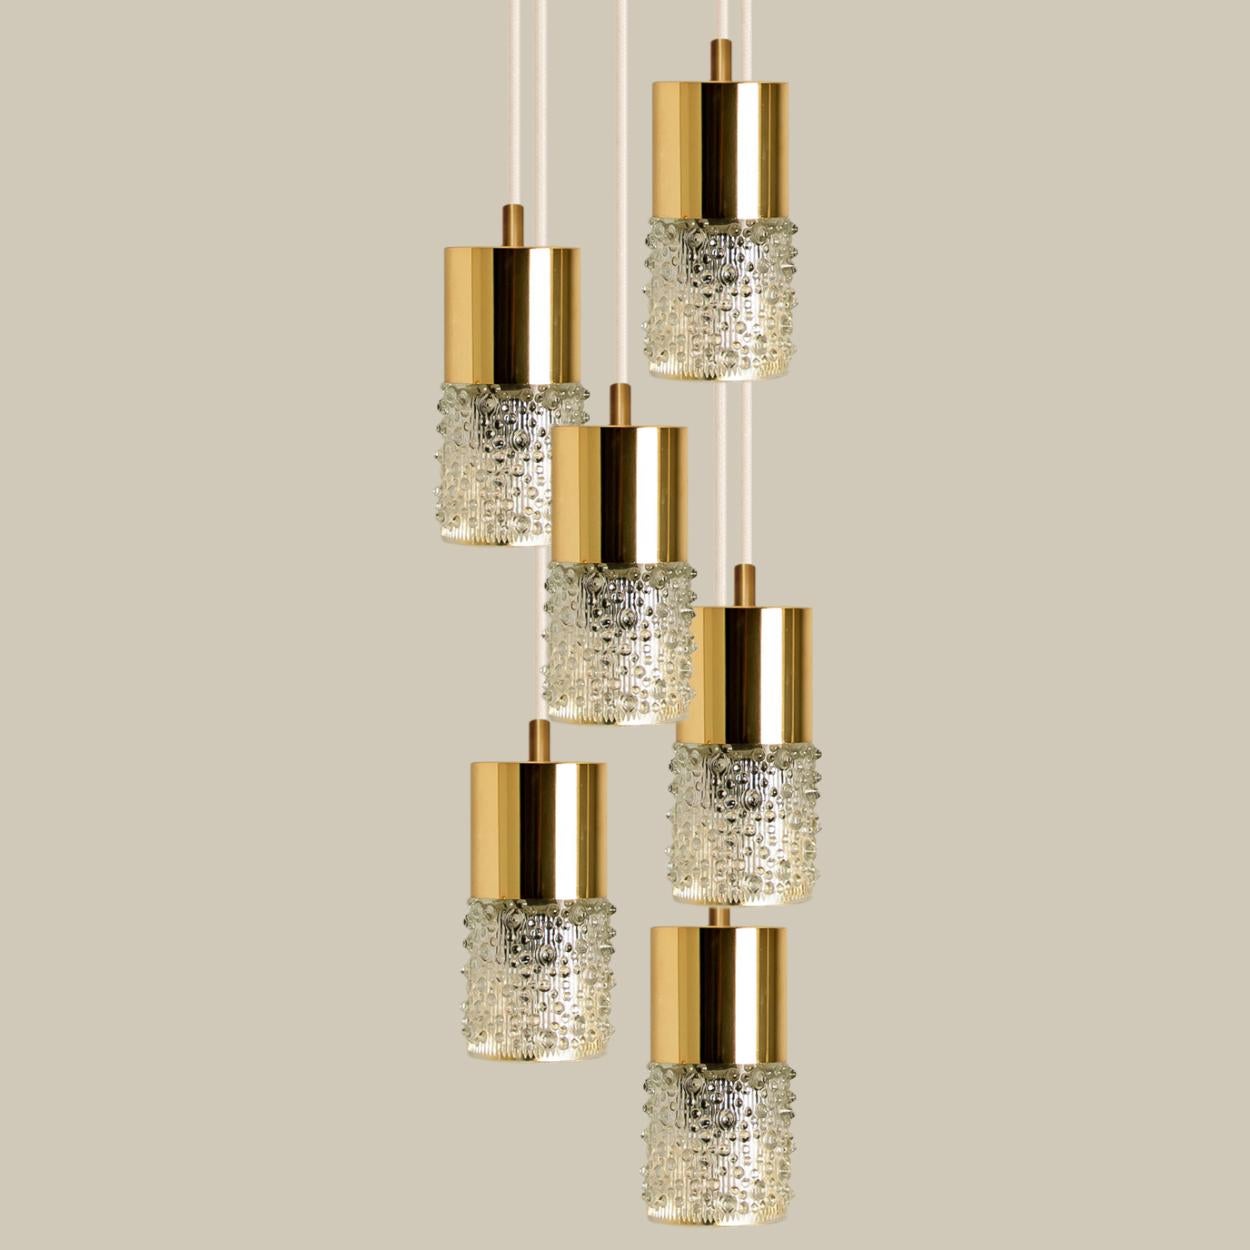 6 brass and glass pendant lights, made in 1970s in Germany, Europe.
The lights consists of a brassed plastic tube with tubular glass lampshade made of clear pressed glass.
The light can be hung separate or as a cascade, as shown in the